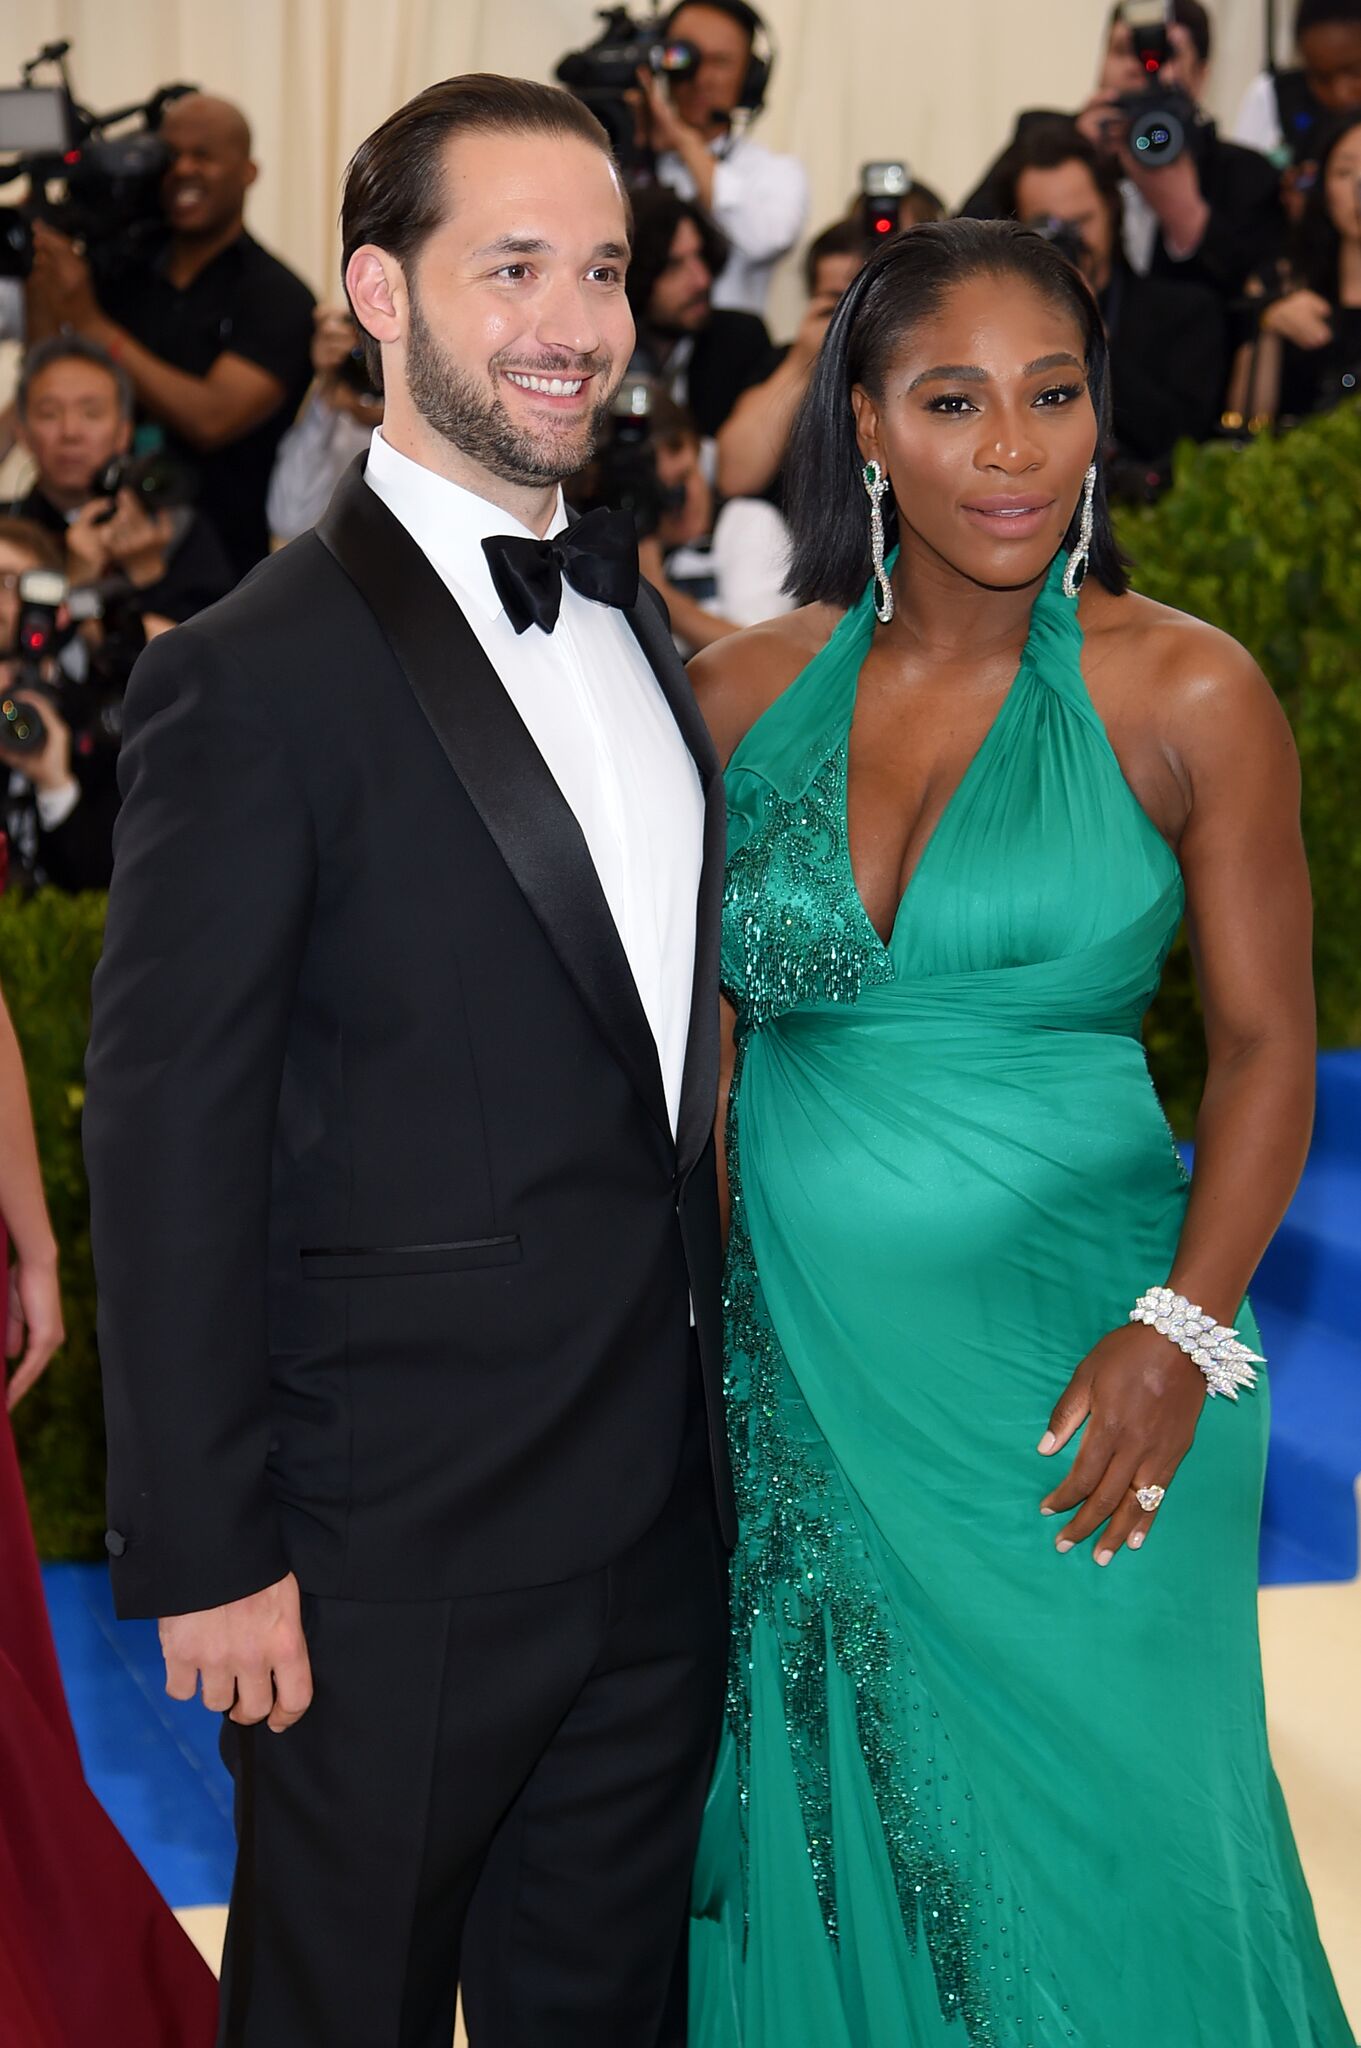 Alexis Ohanian and Serena Williams at the  Costume Institute Gala at the Metropolitan Museum of Art on May 1, 2017. | Photo: Getty Images